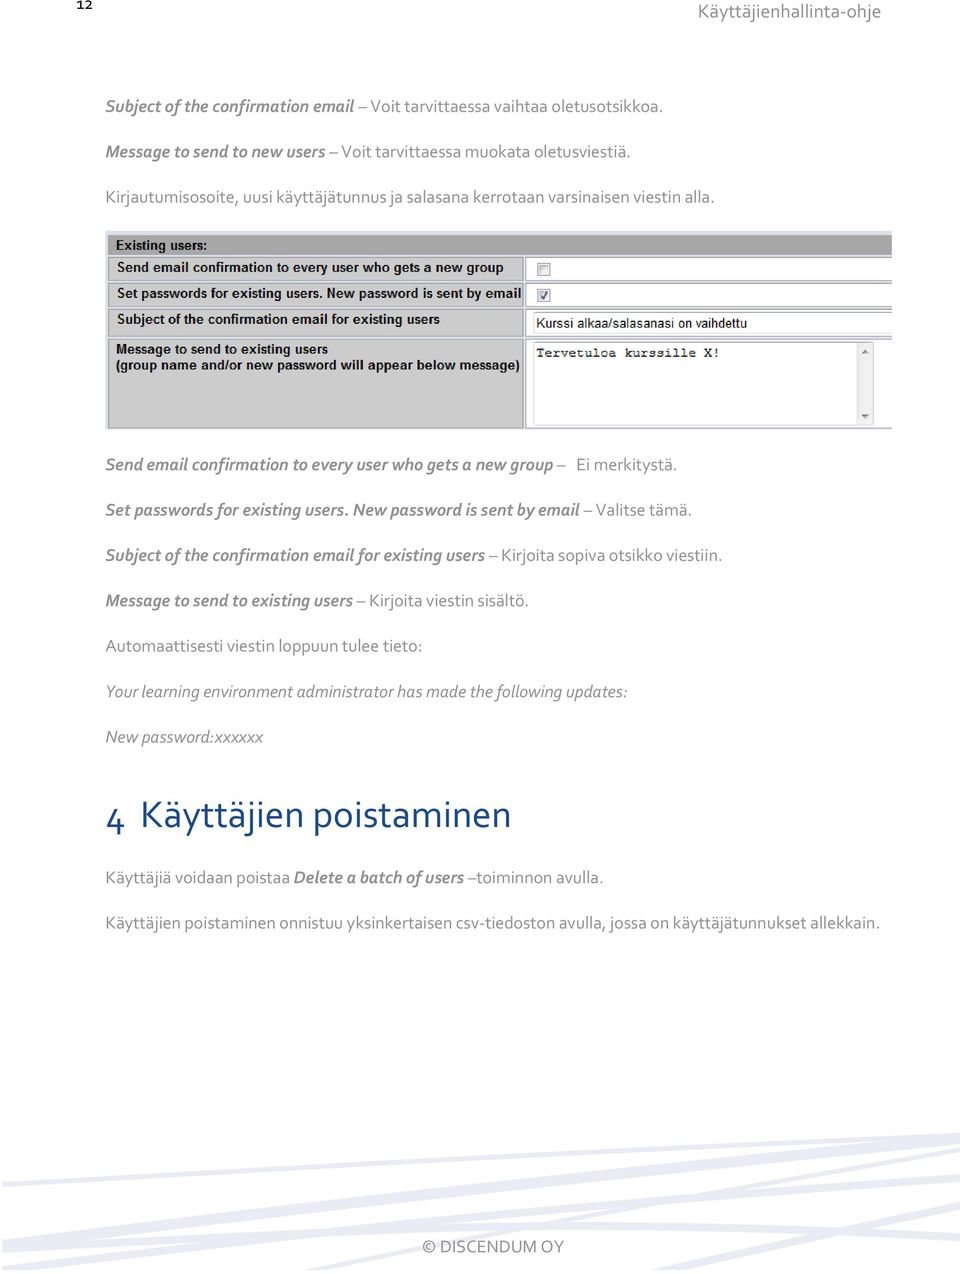 New password is sent by email Valitse tämä. Subject of the confirmation email for existing users Kirjoita sopiva otsikko viestiin. Message to send to existing users Kirjoita viestin sisältö.